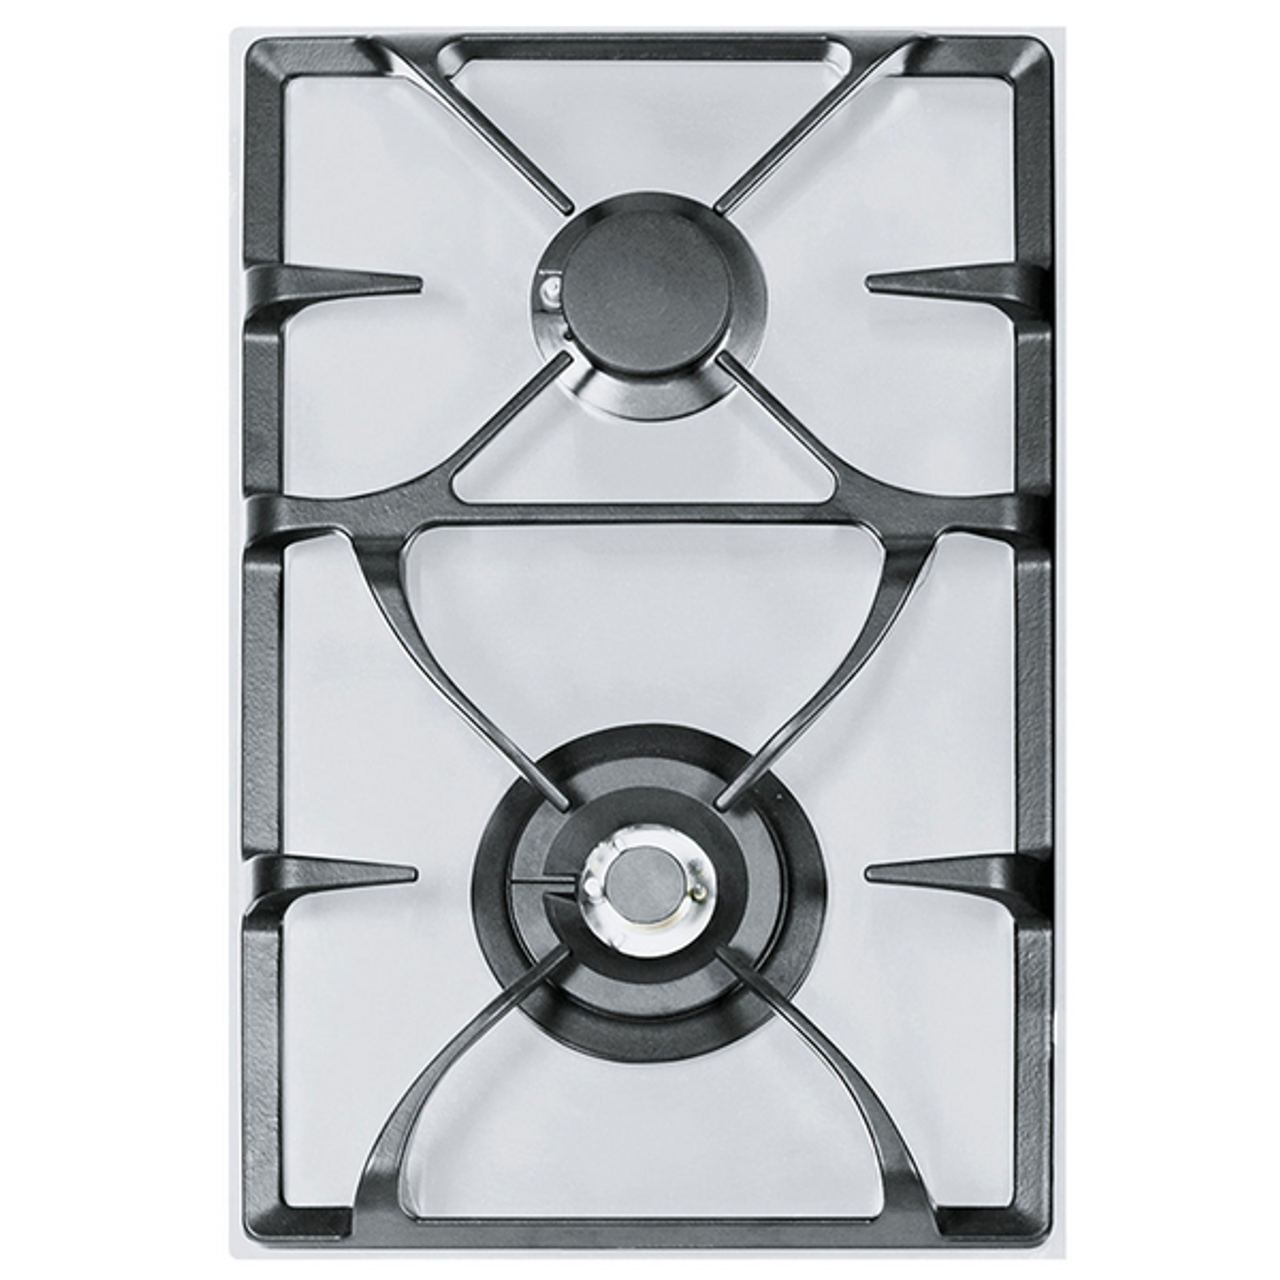 FIG604S1L - 66cm Professional Series LPG Gas Cooktop - Stainless Steel